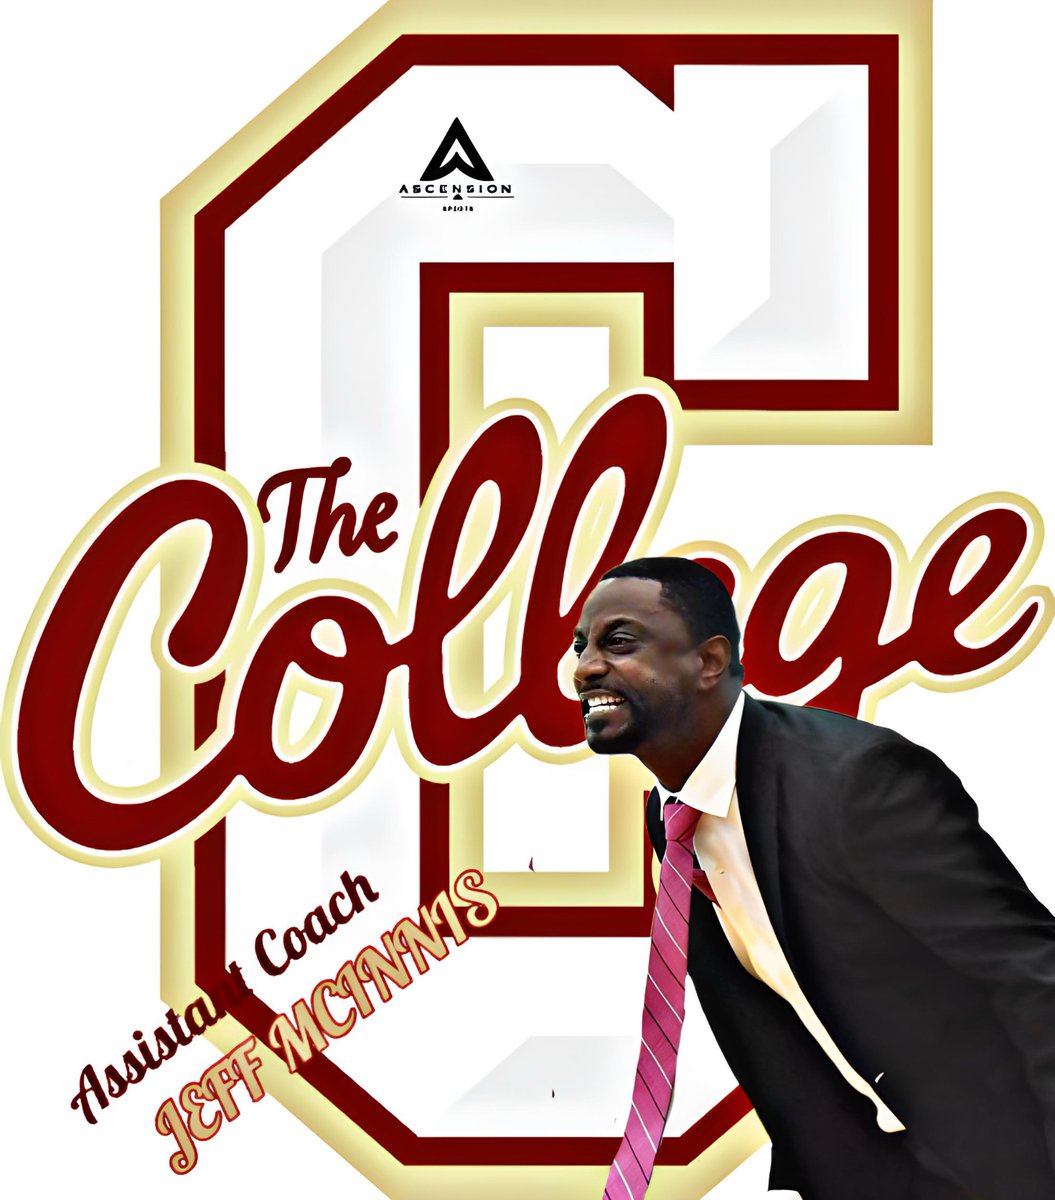 Congratulations to Ascension Sports family Jeff Mcinnis on his new job as AC at the College of Charleston. #KeepAscending #ItsJustALittleWork #ProgramChangerz